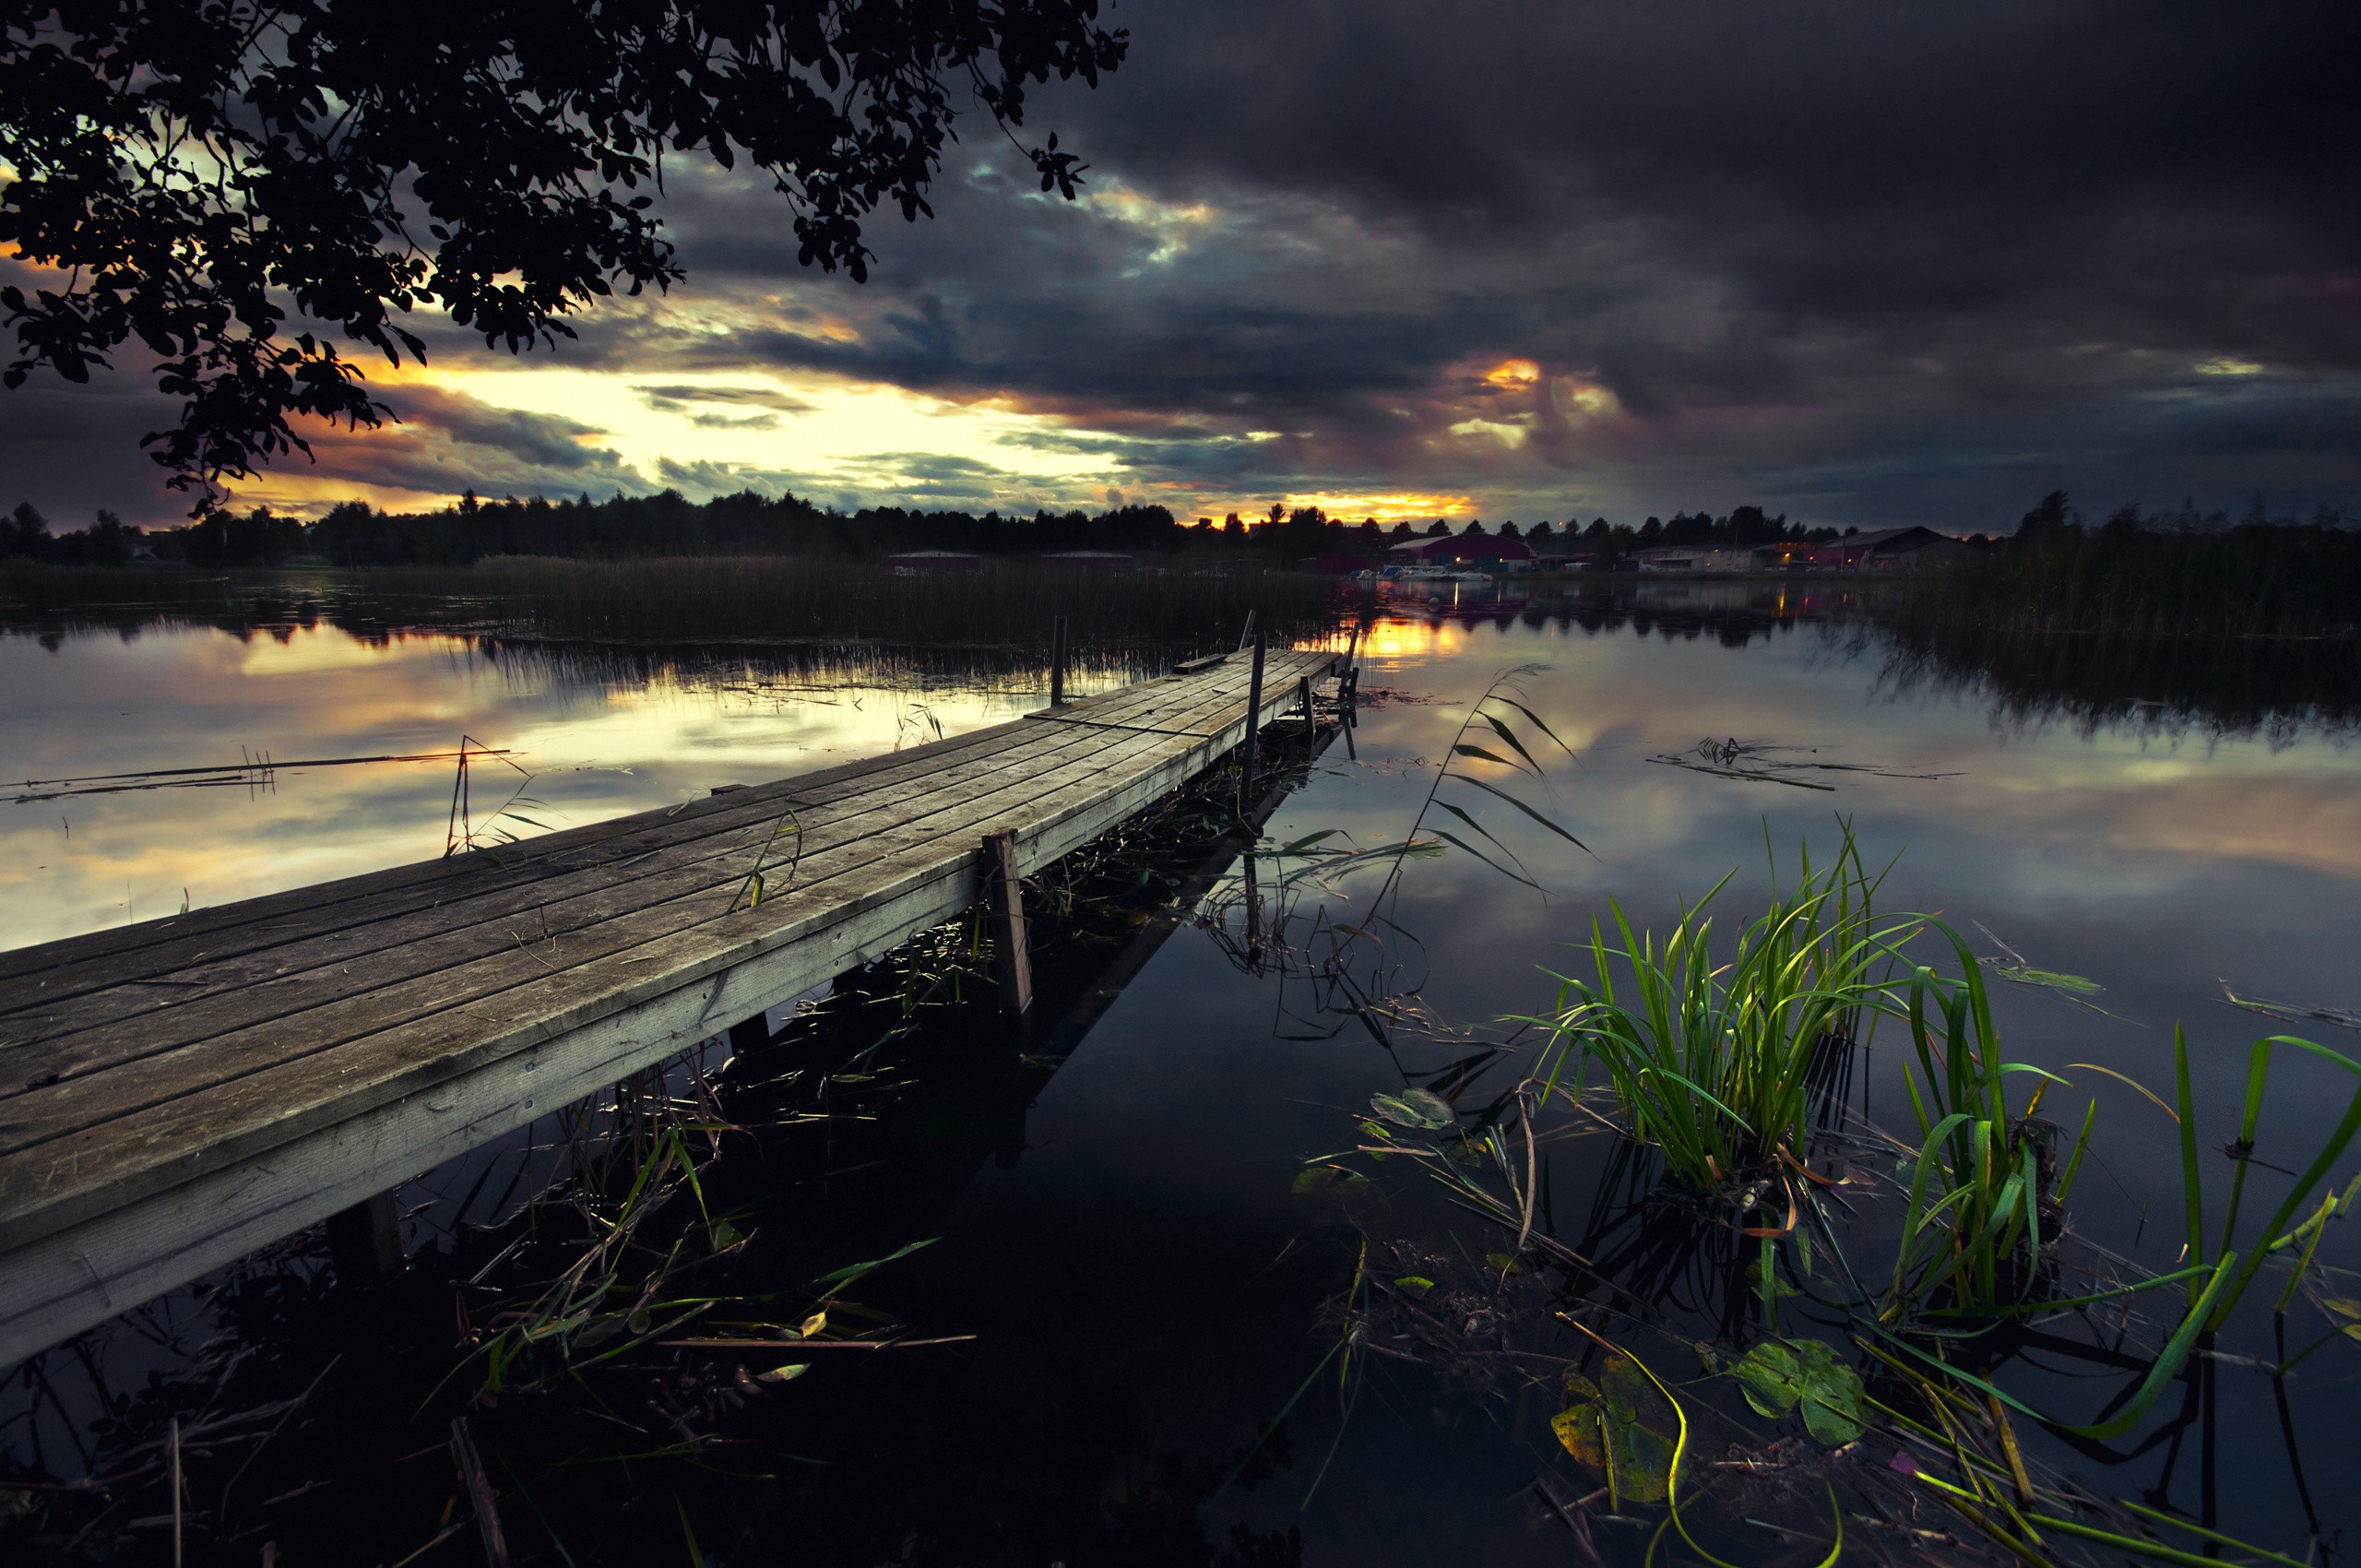 General 2560x1700 pier clouds lake evening reeds nature low light